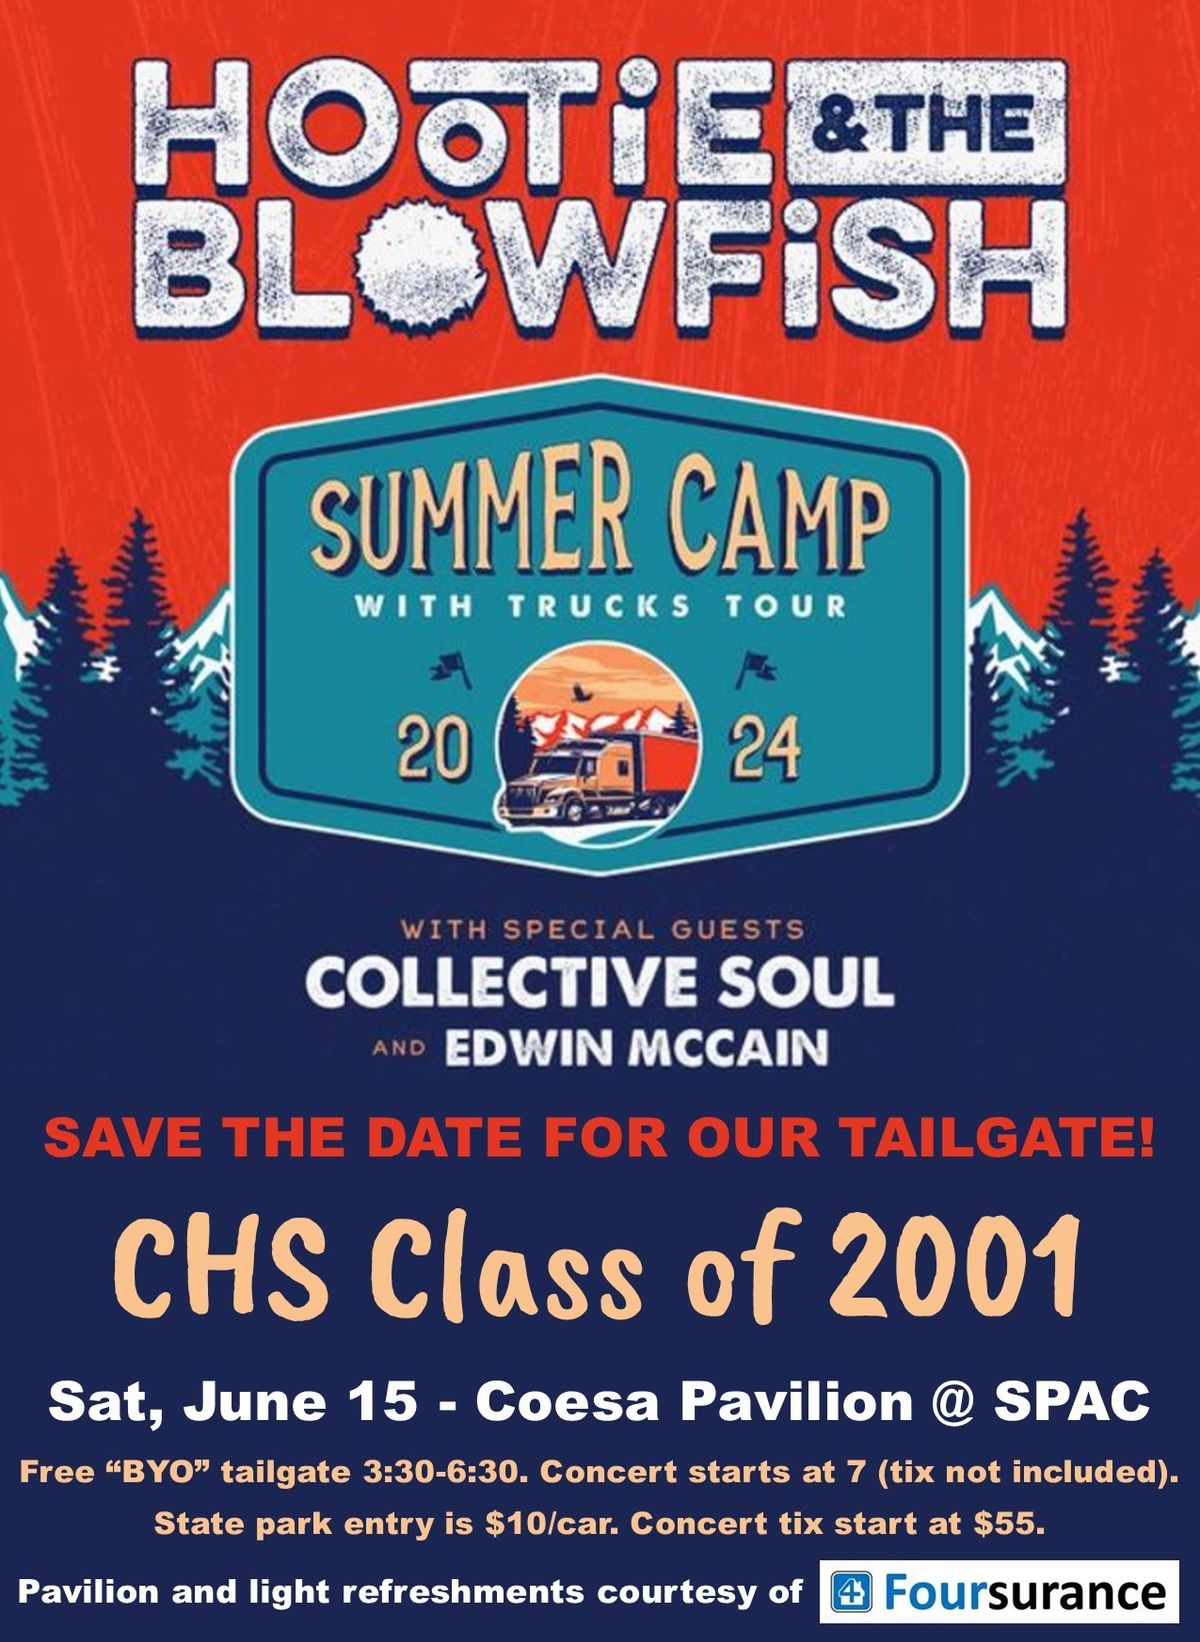 CHS Class of 2001 Tailgate at SPAC (Pre-Hootie & The Blowfish)